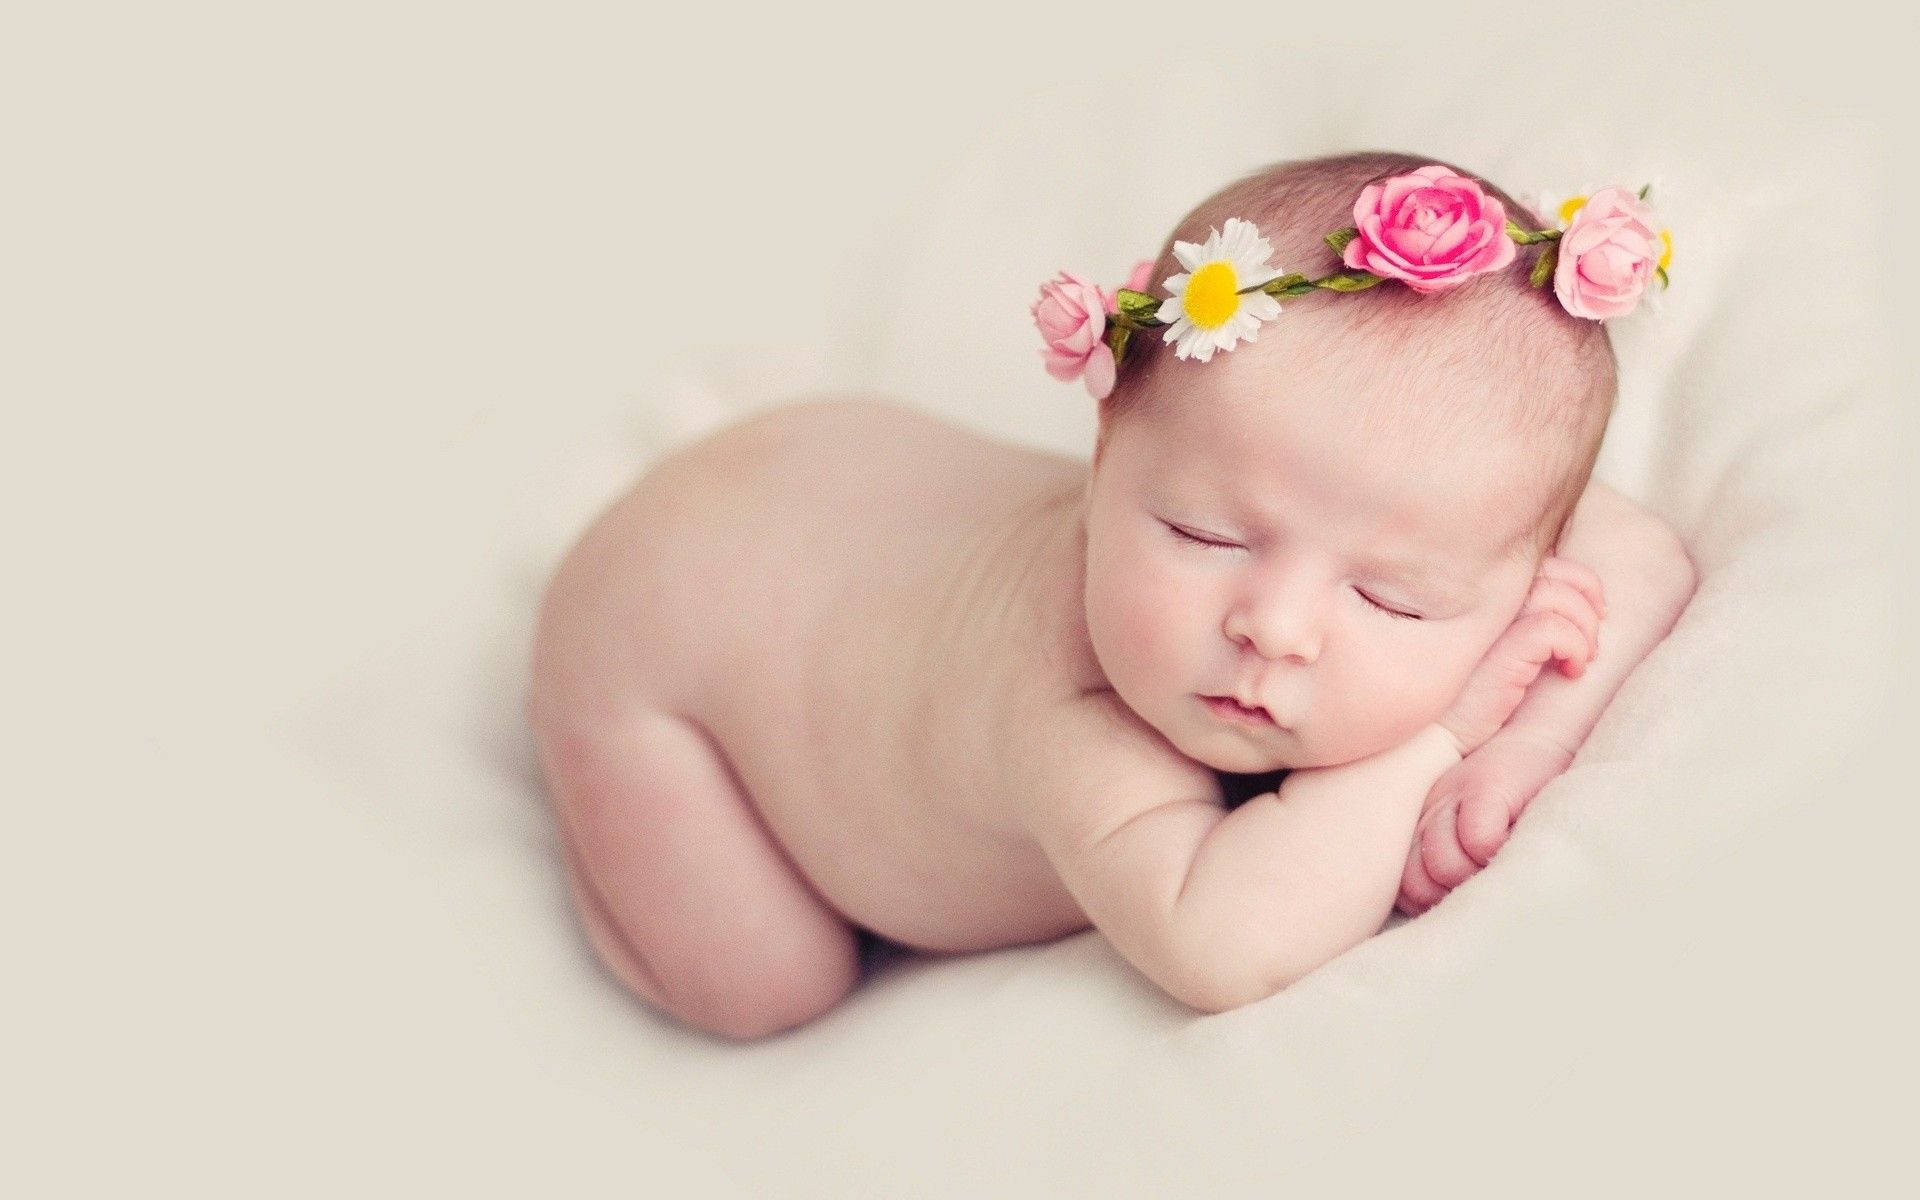 cute baby wallpapers for mobile phones